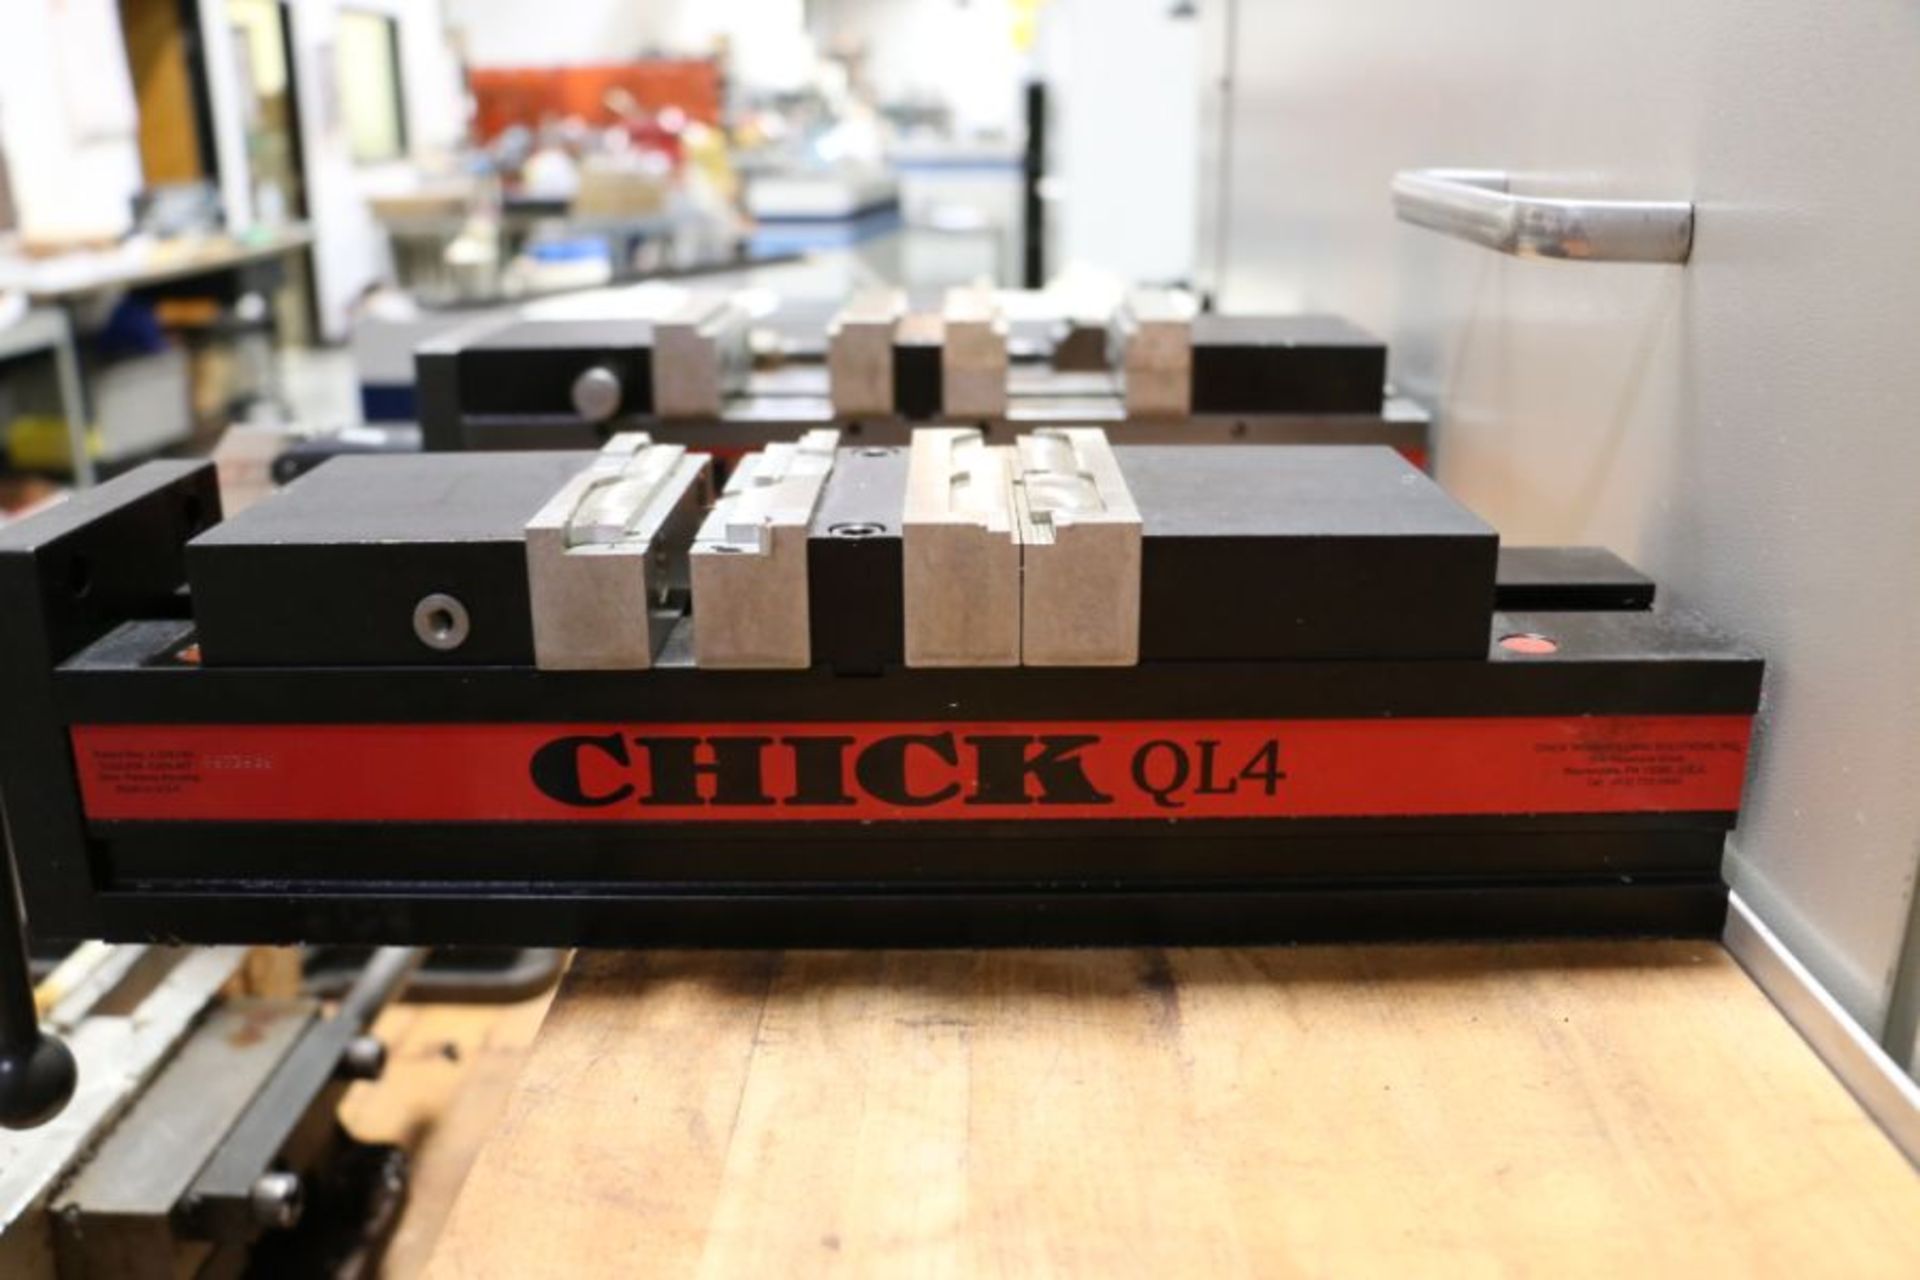 Chick QL4 Double Lock Vise - Image 3 of 5